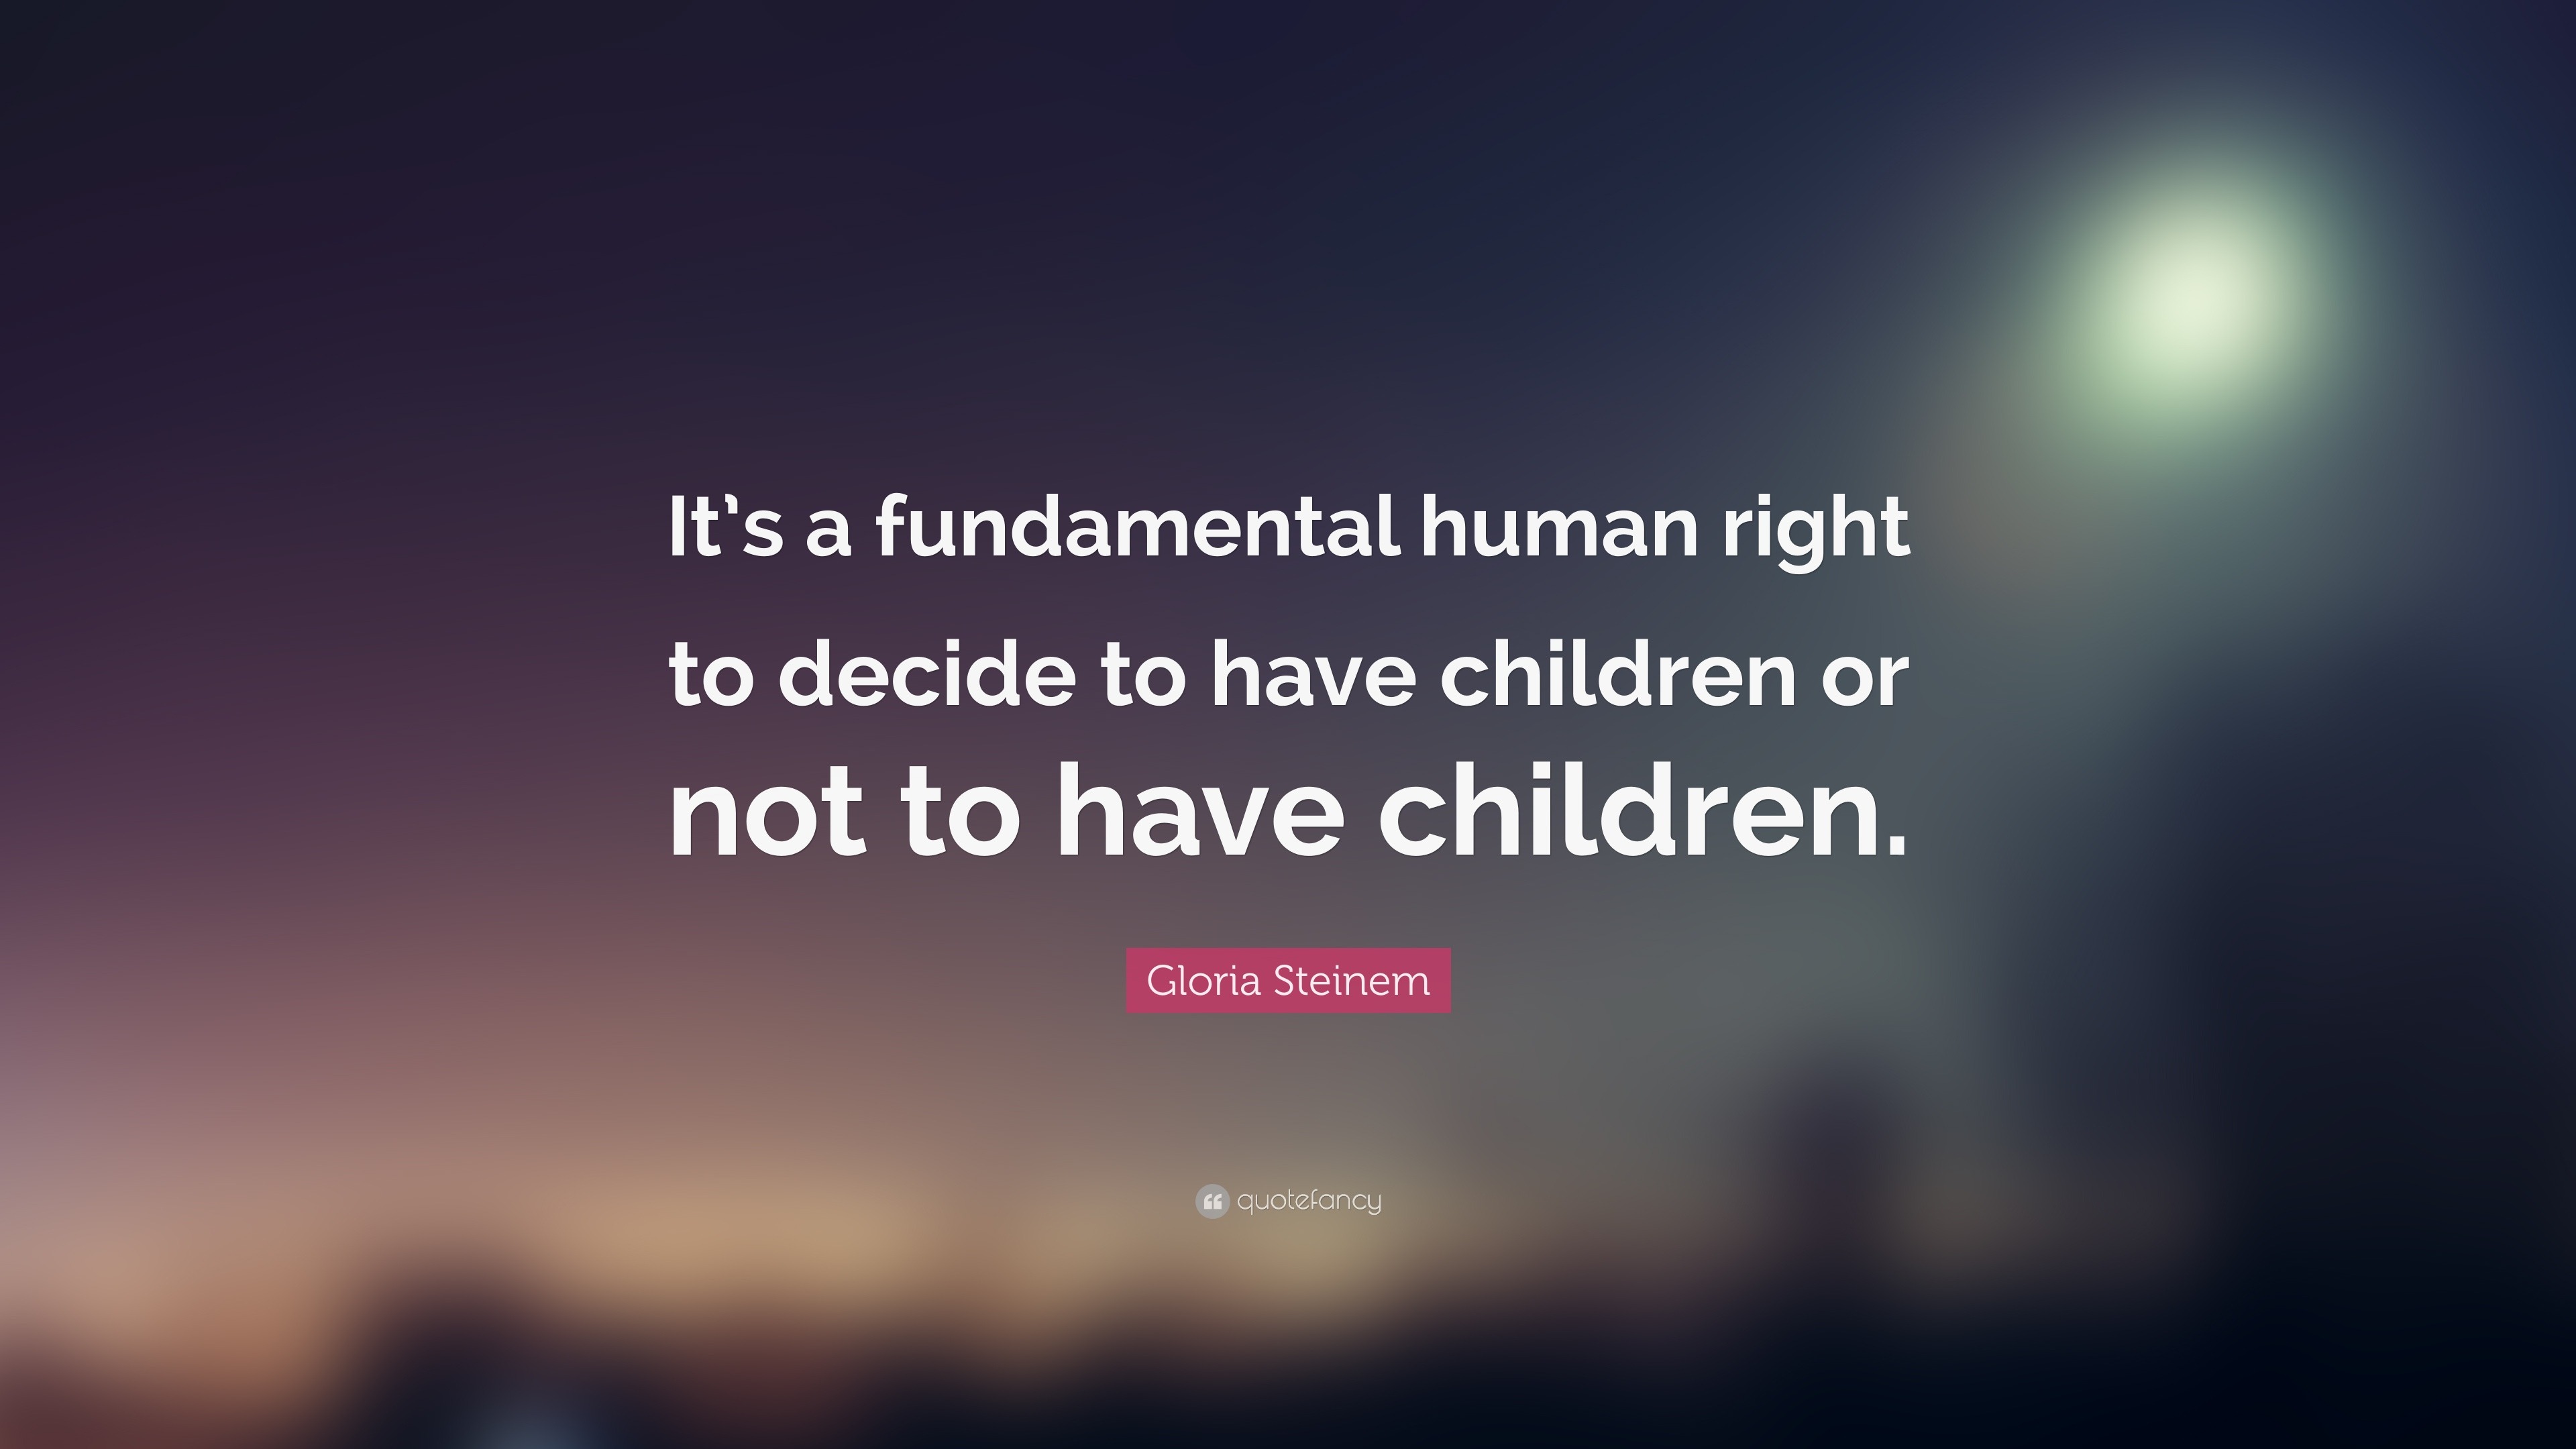 Gloria Steinem Quote: "It's a fundamental human right to ...